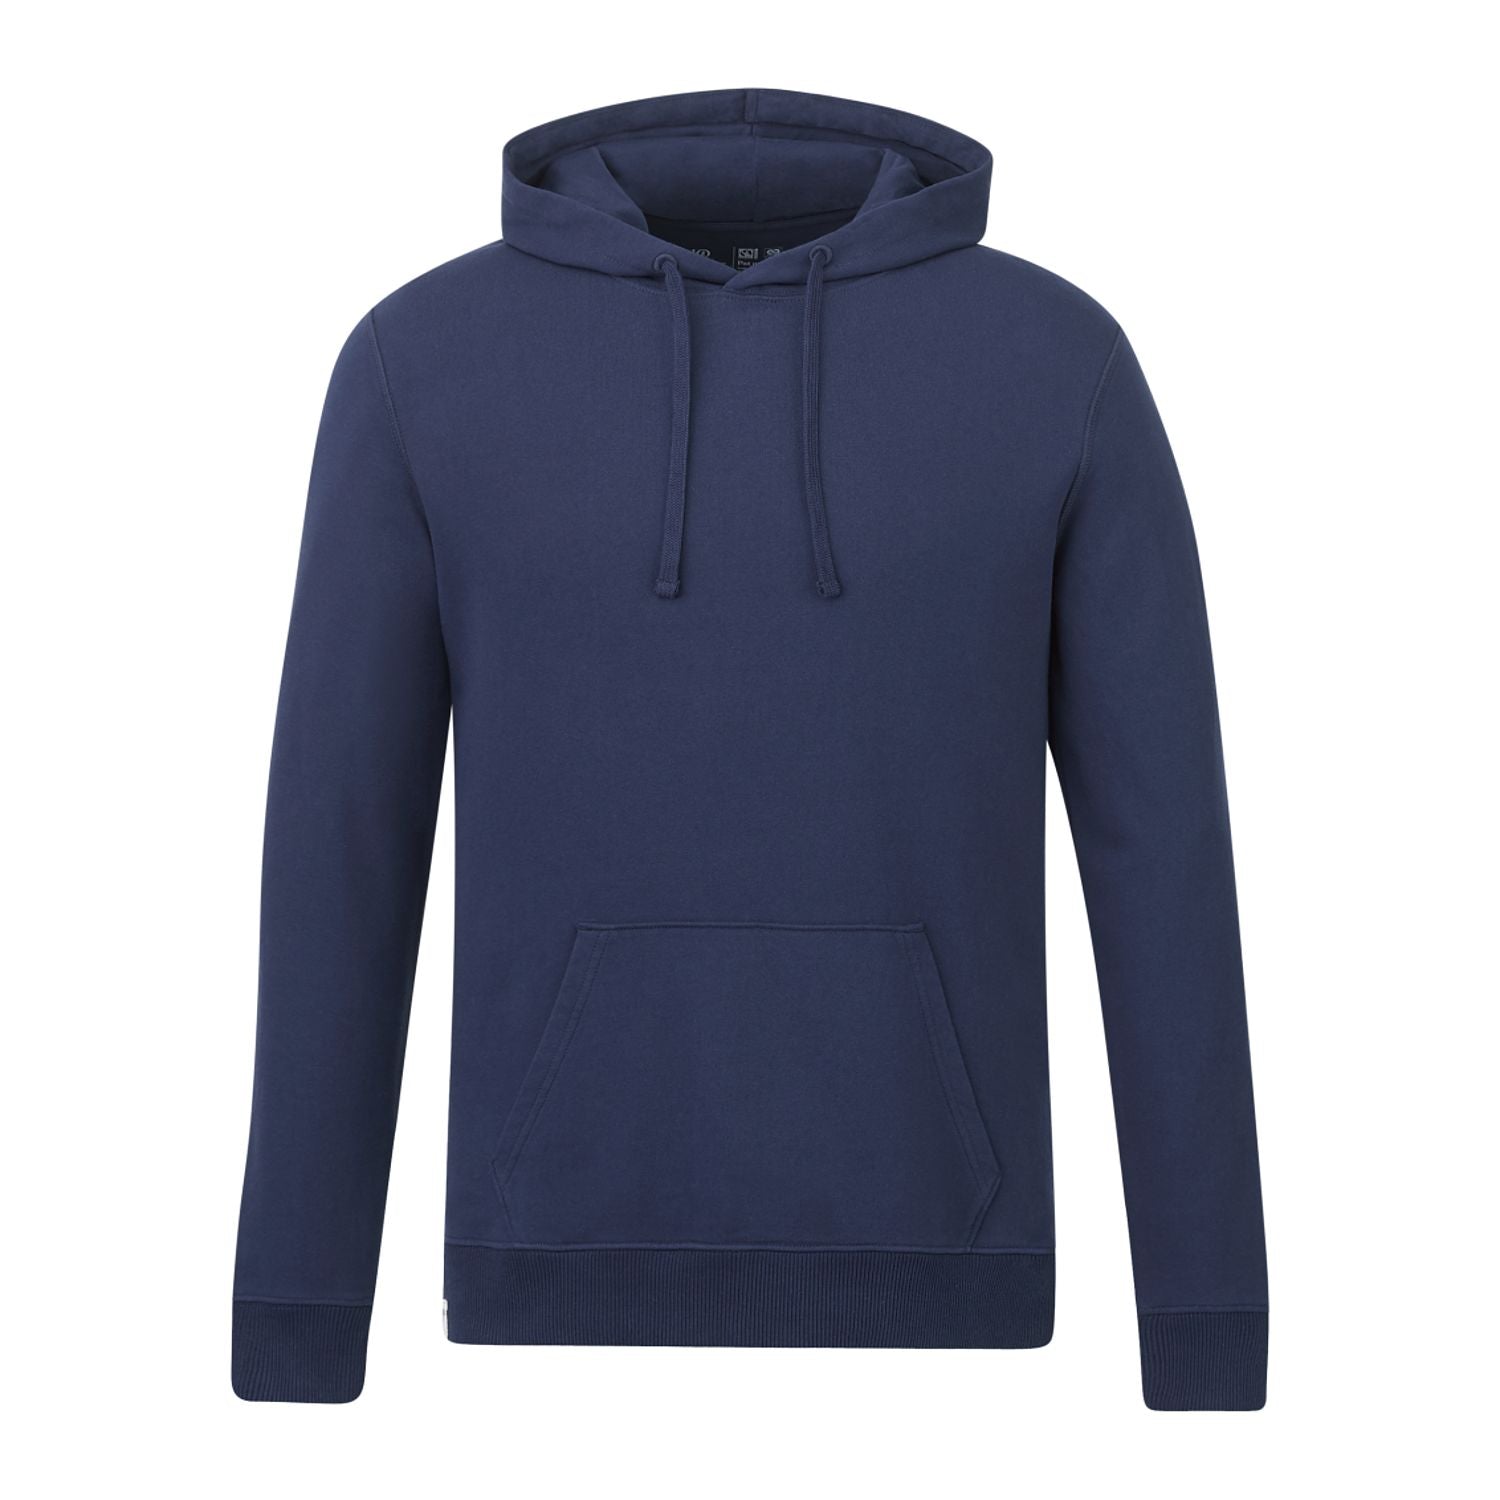 Customizable Tentree men's organic cotton french terry classic hoodie in dress blue.